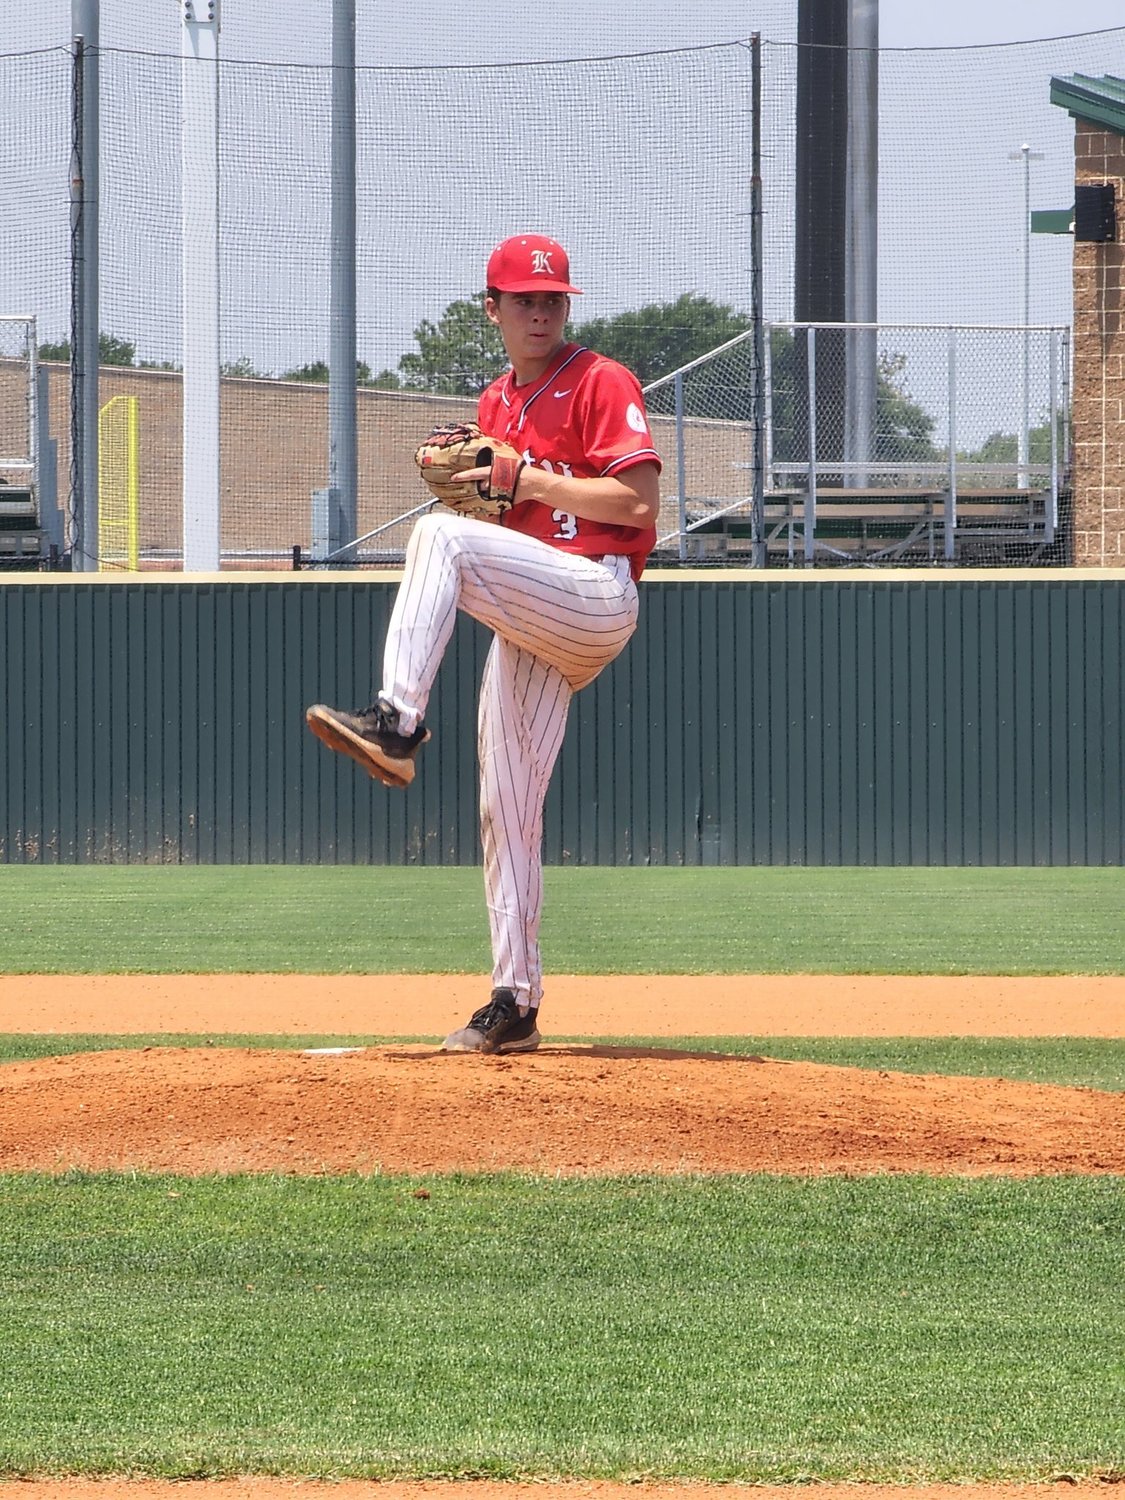 Caleb Koger pitched a no-hitter in Katy’s second game against Fort Bend Travis to advance to the area round.